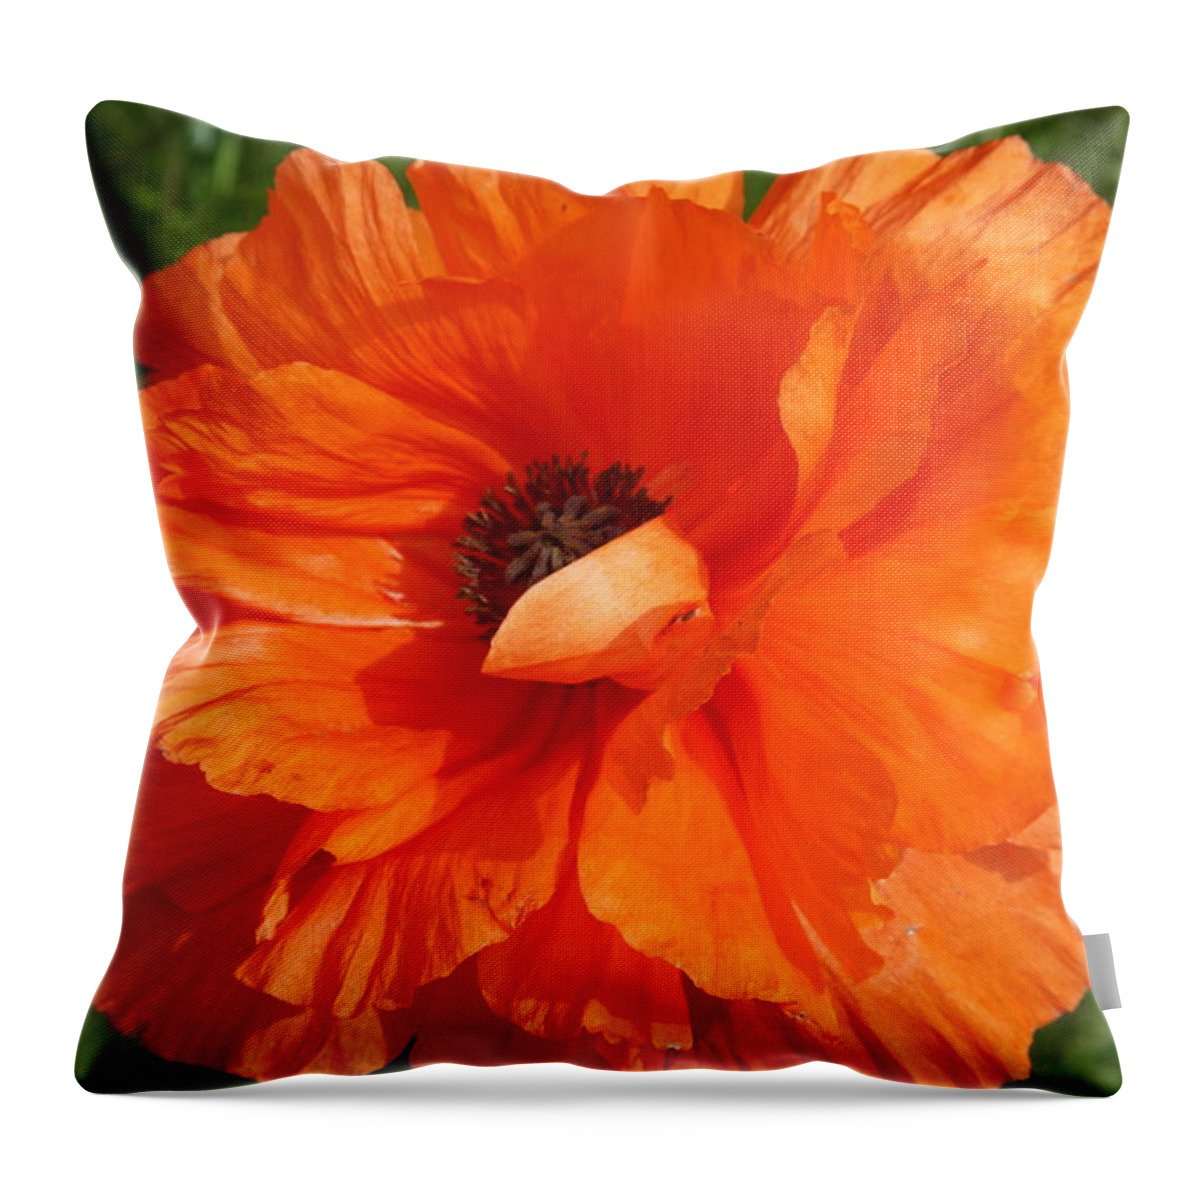 Poppy Throw Pillow featuring the photograph Olympia Orange Poppy by Christiane Schulze Art And Photography